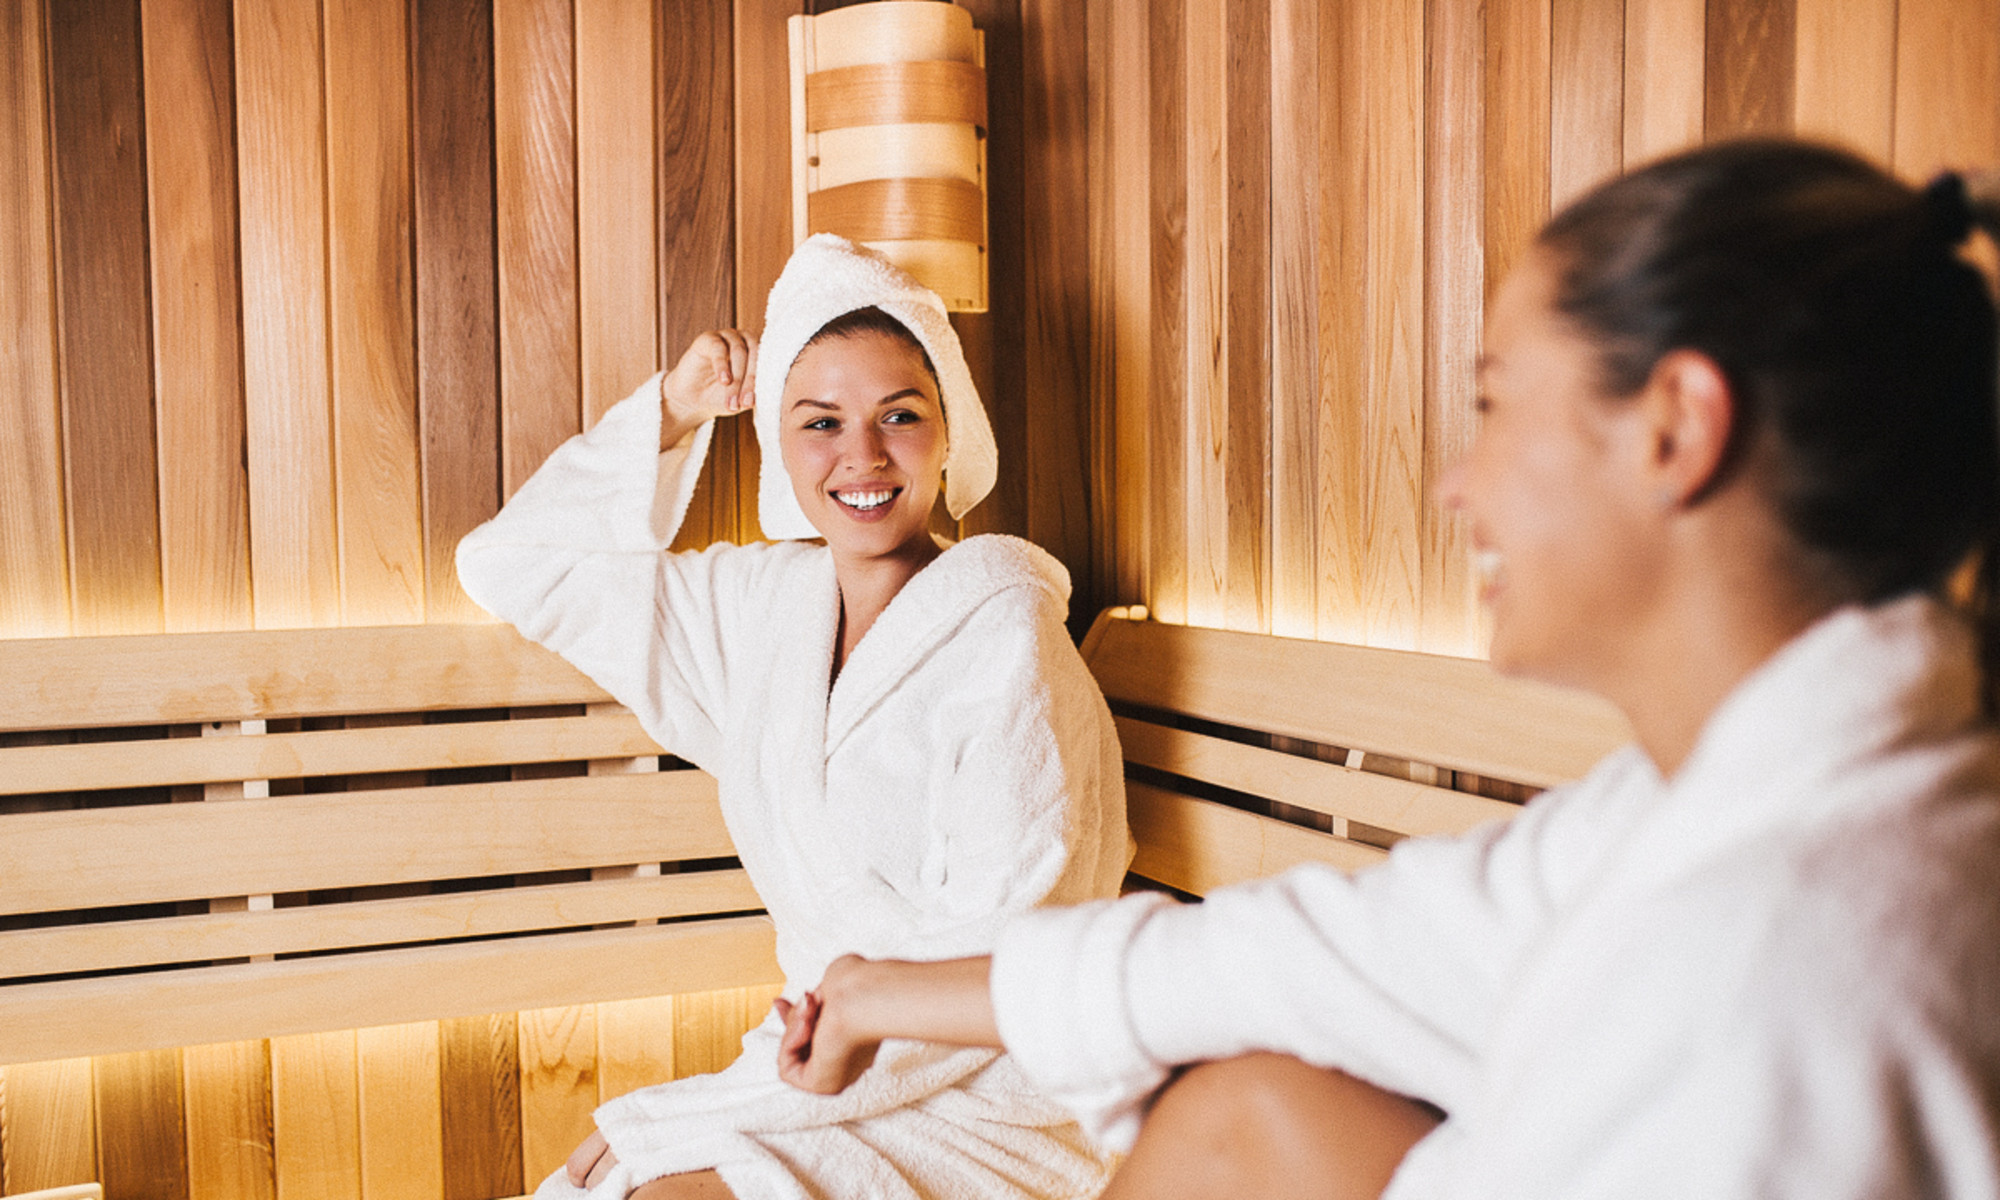 Do Infrared Saunas Have Any Health Benefits? 4 Potential Benefits